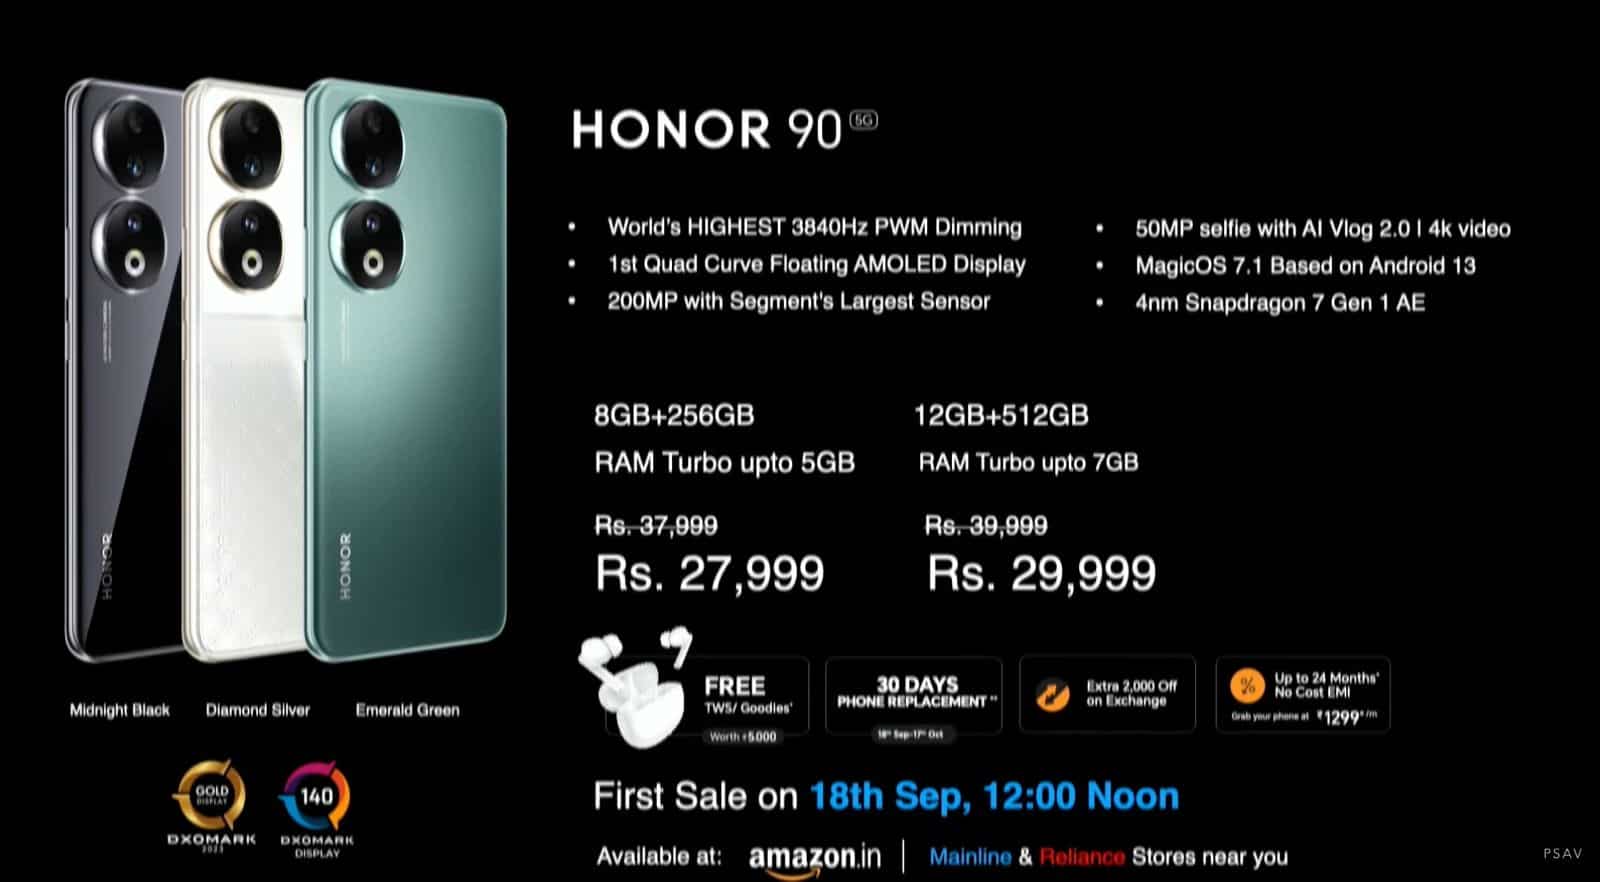 Honor 90: Pricing and Availability